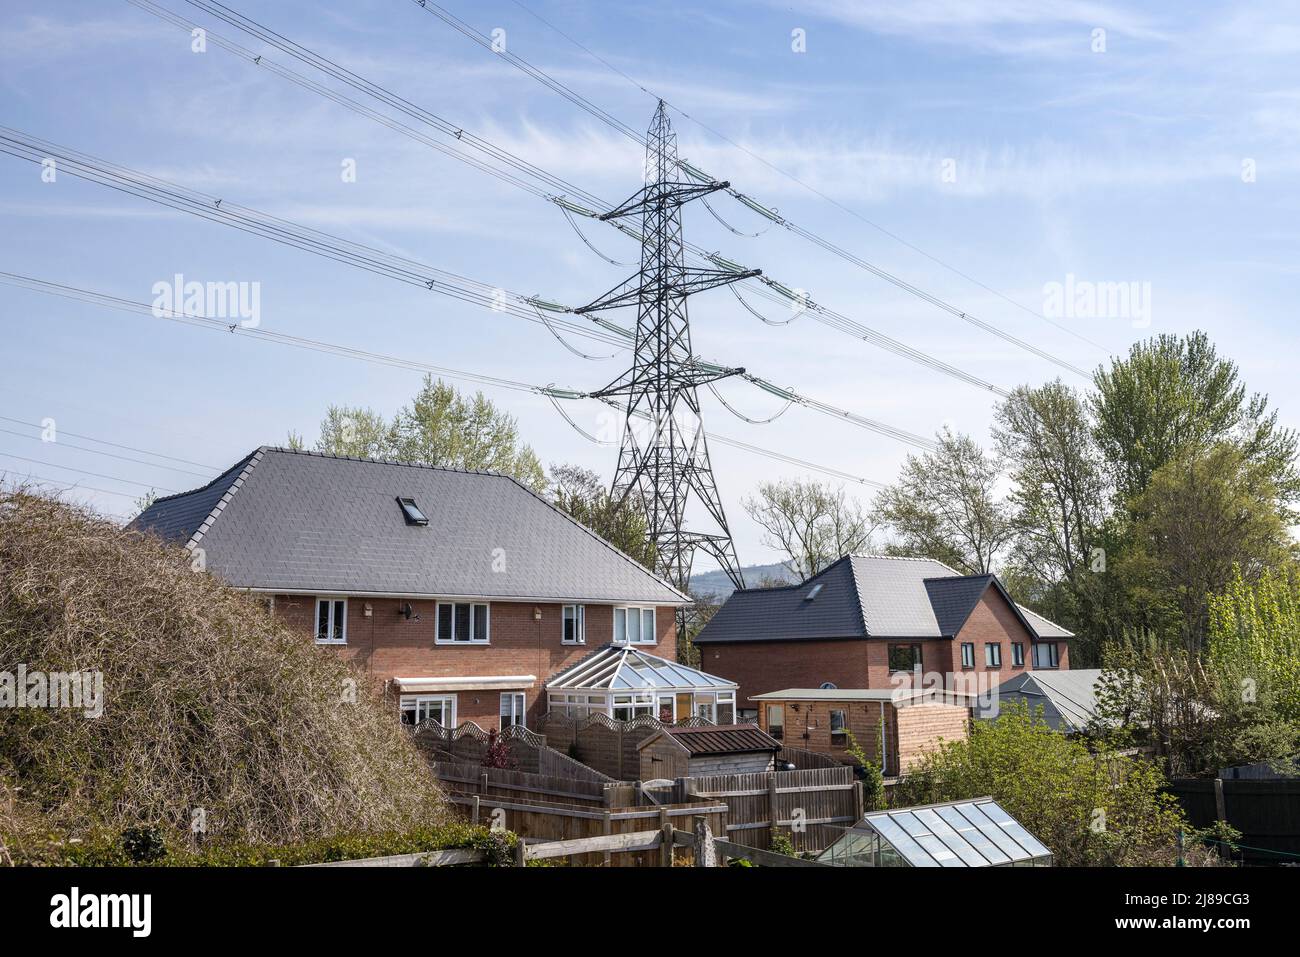 Houses overshadowed by electricity pylons, Llanfoist, Wales, UK Stock Photo